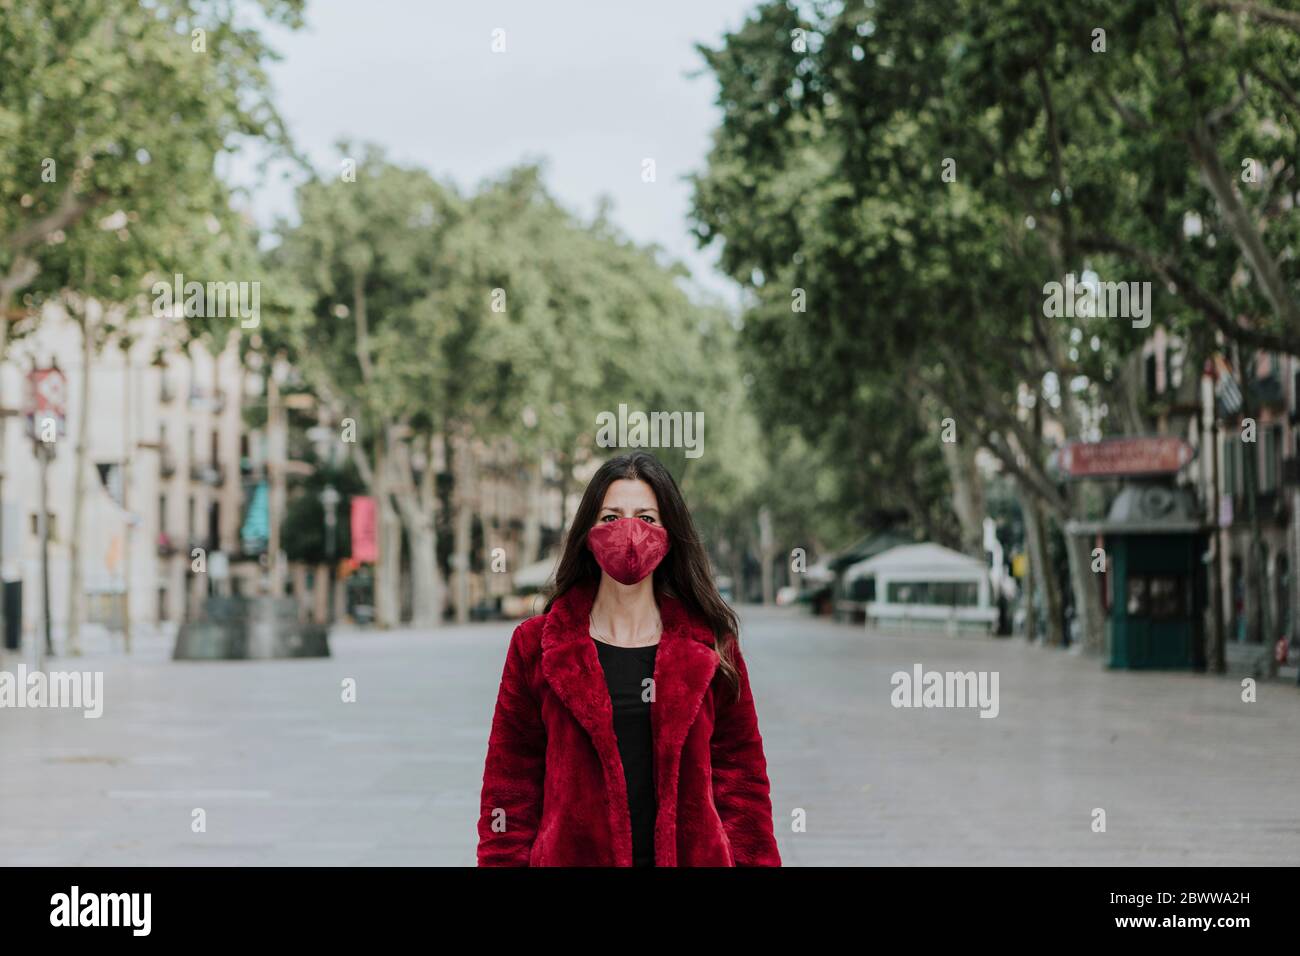 Portrait of woman wearing red face mask and jacket standing on empty street in city, Barcelona, Spain Stock Photo